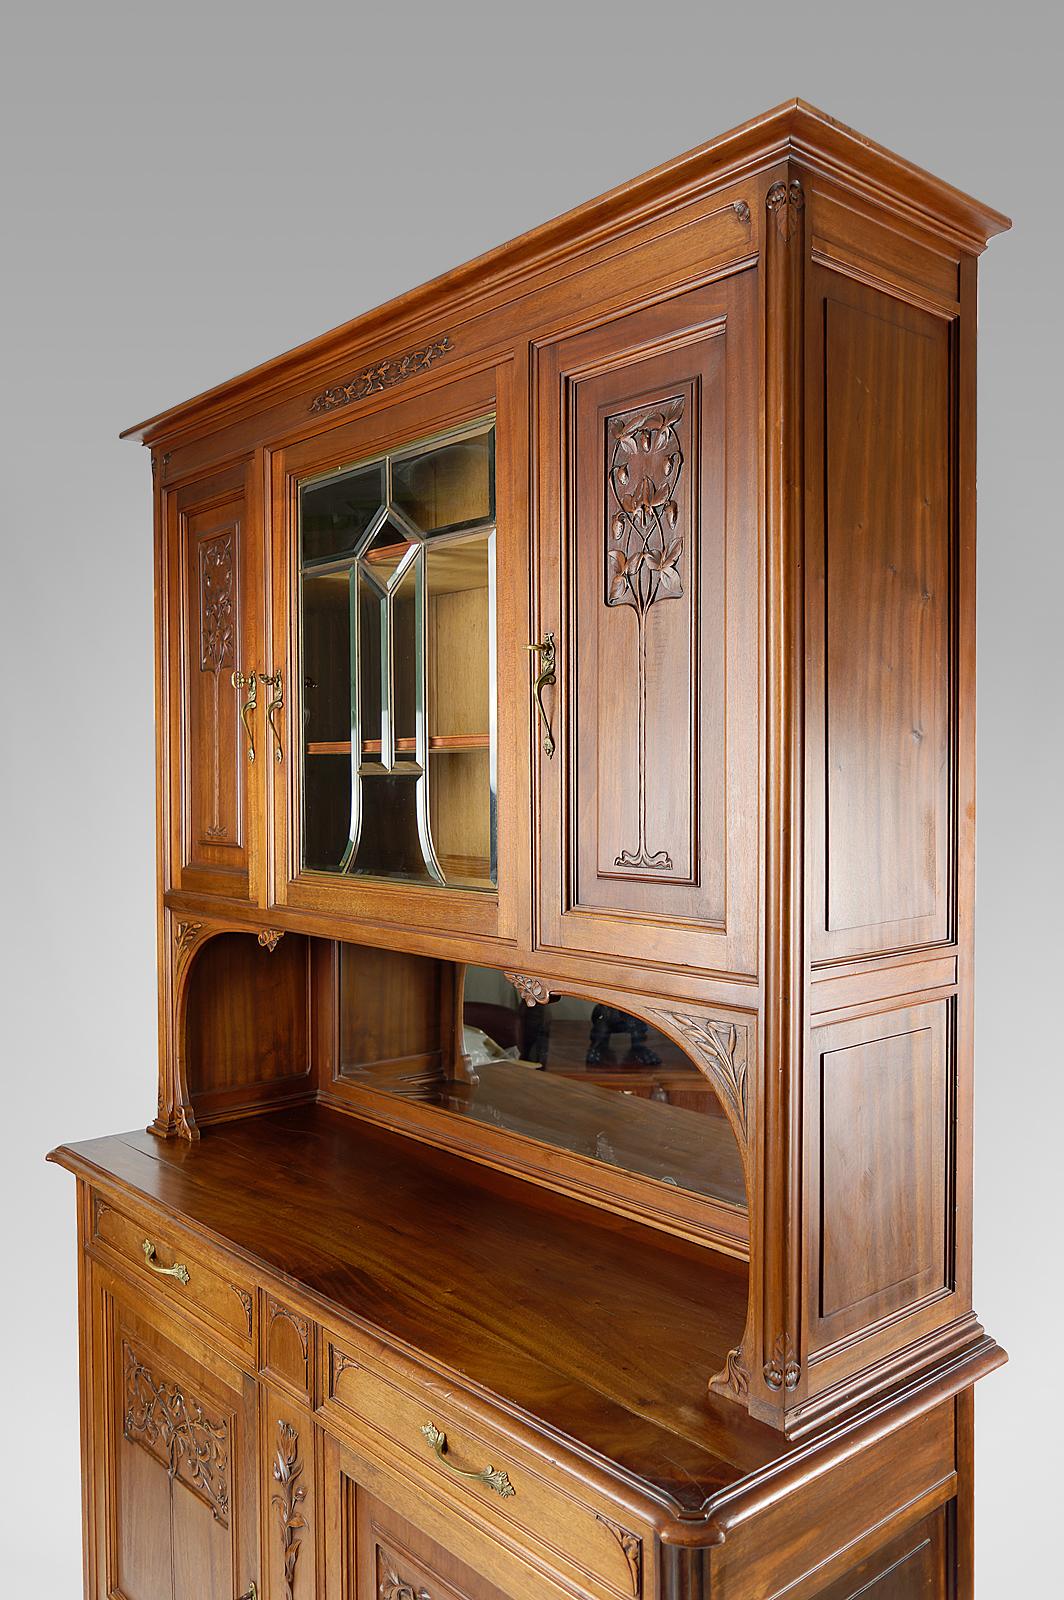 Early 20th Century French Art Nouveau Sideboard in Carved Walnut with Stained Glass, circa 1910